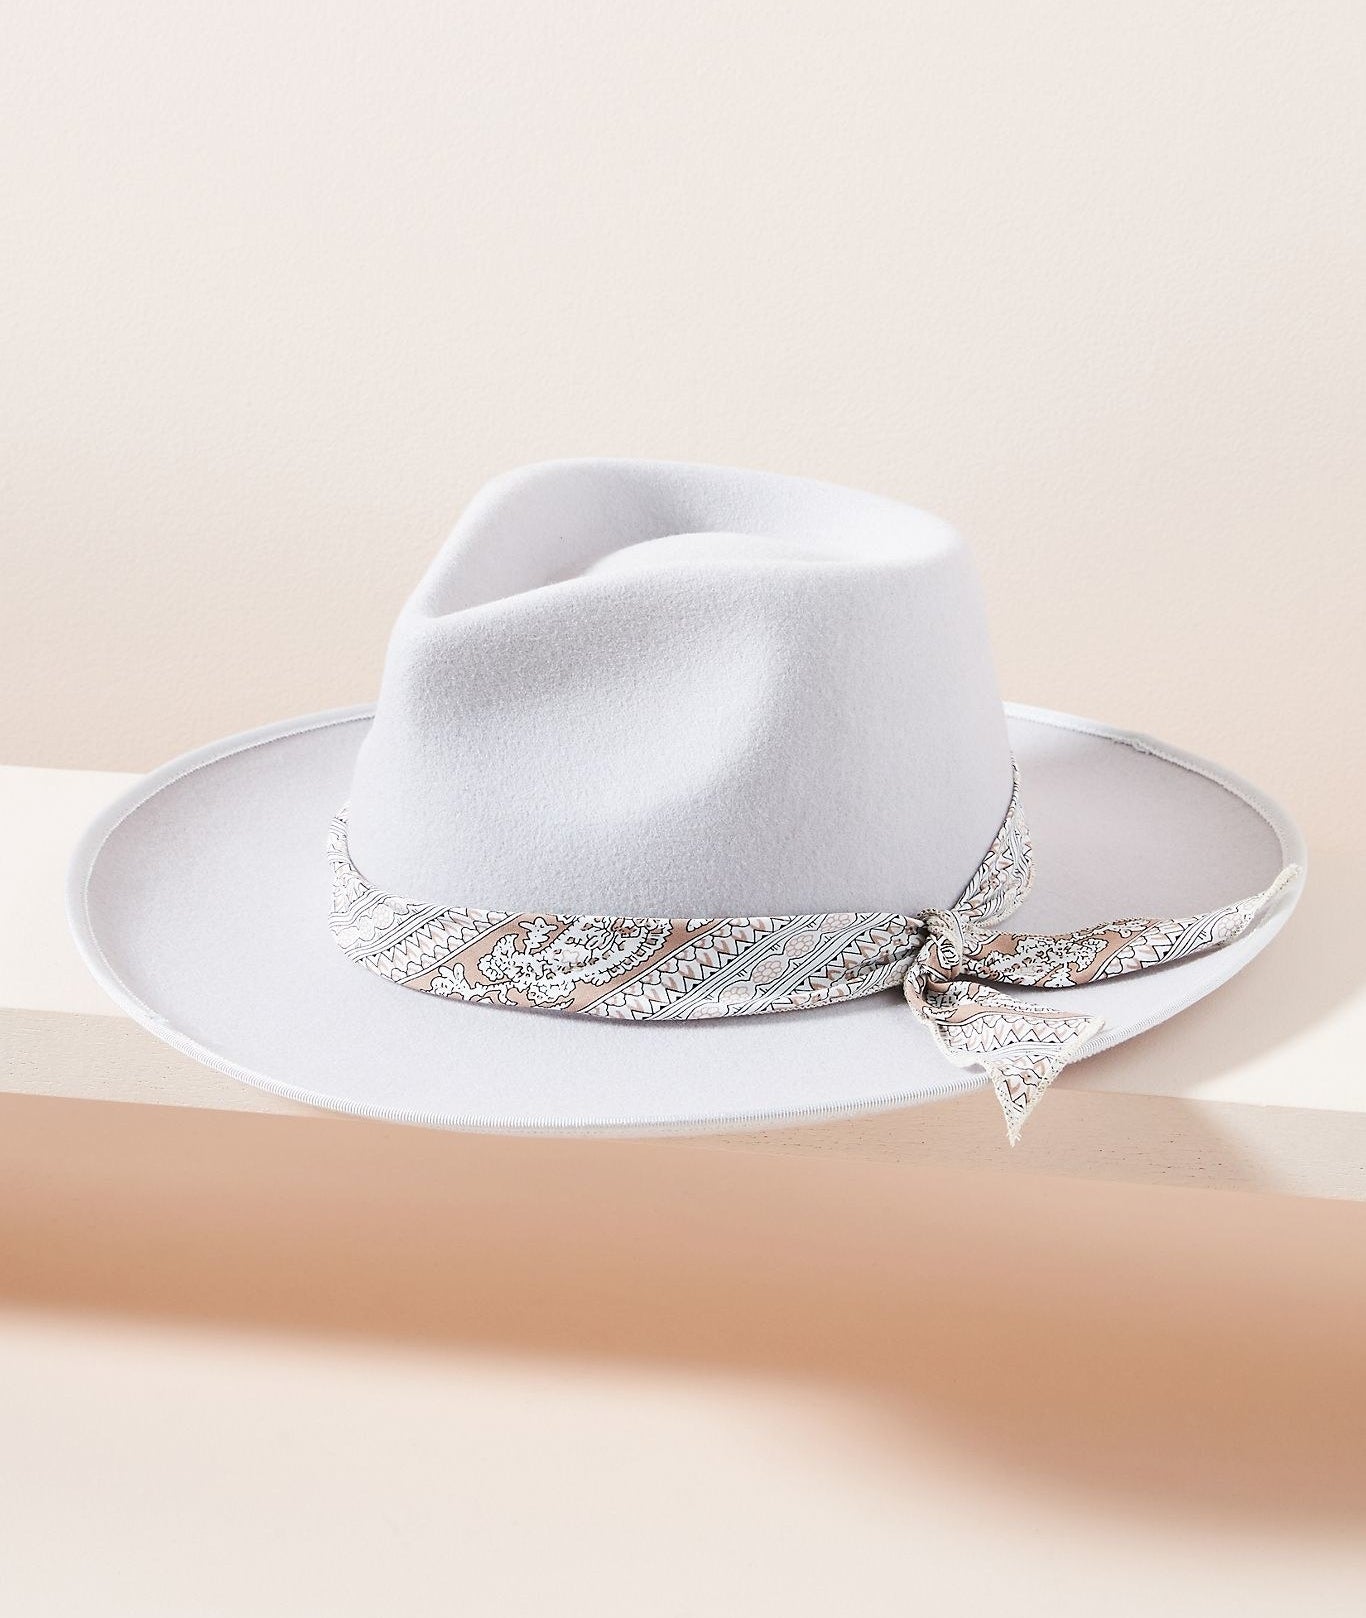 A gray-lavender fedora with a paisley bandana tied around the hat